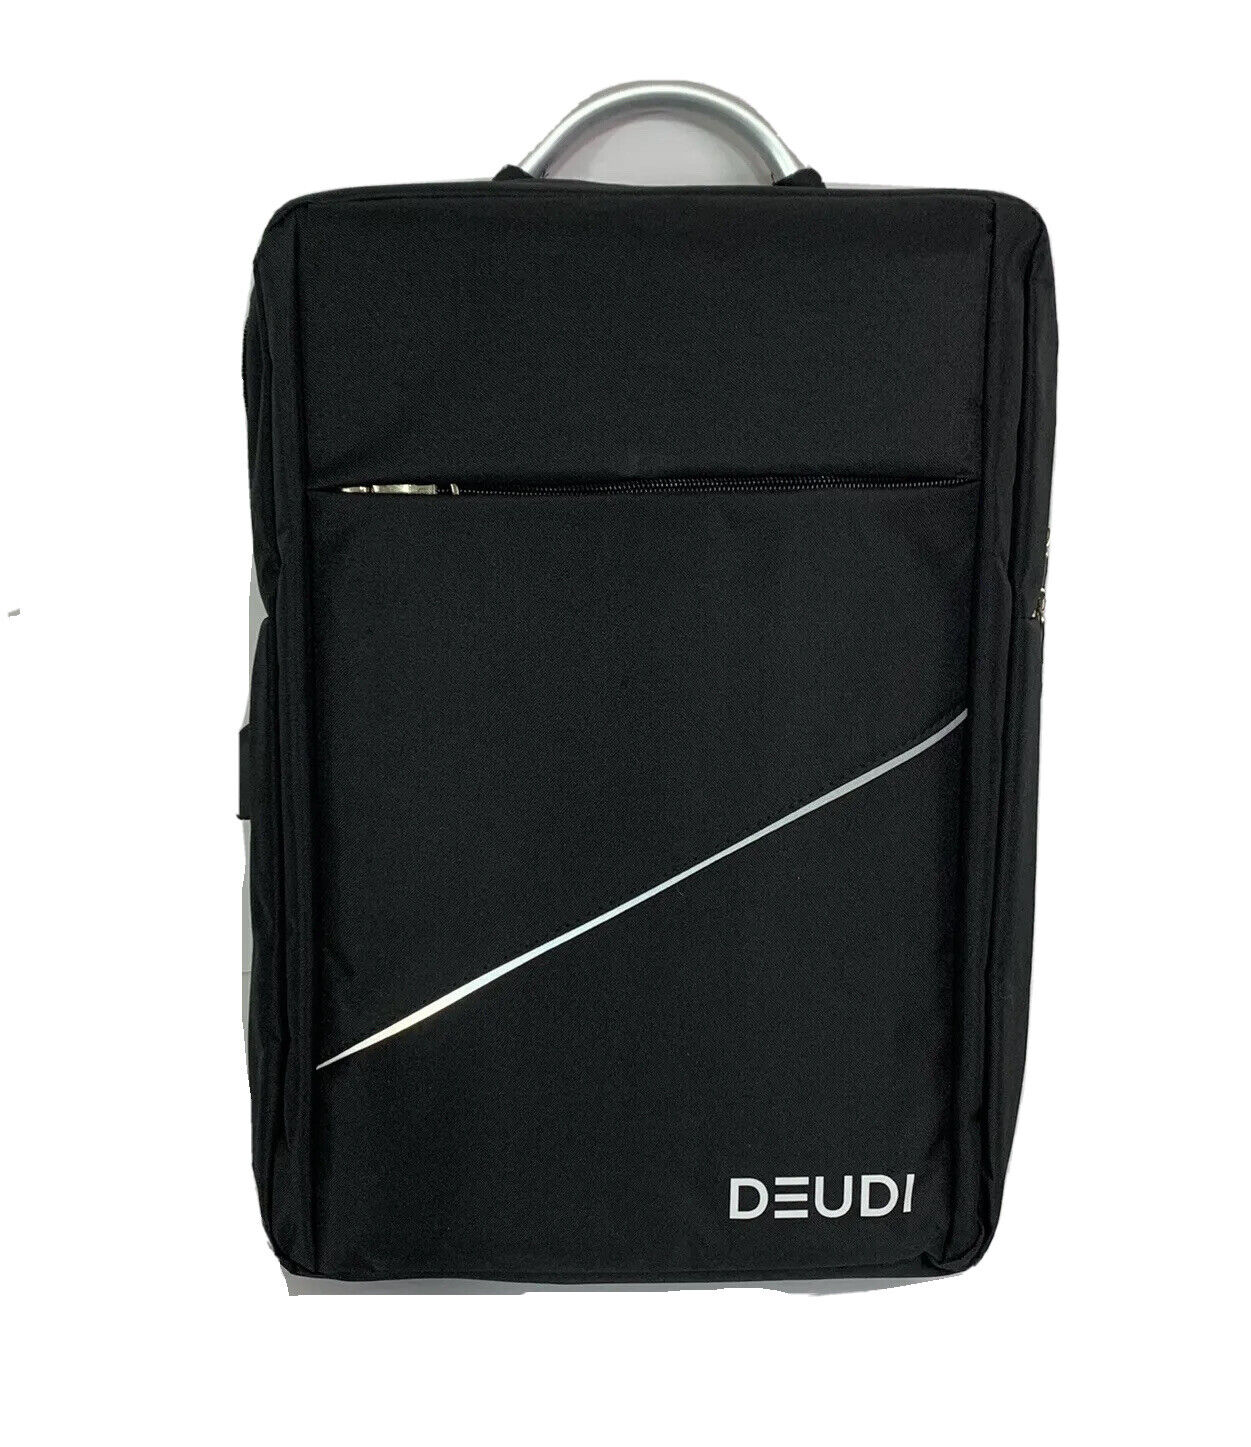 Black Slim Laptop Carry On Case Backpack w/ External USB Port & Charging Cable